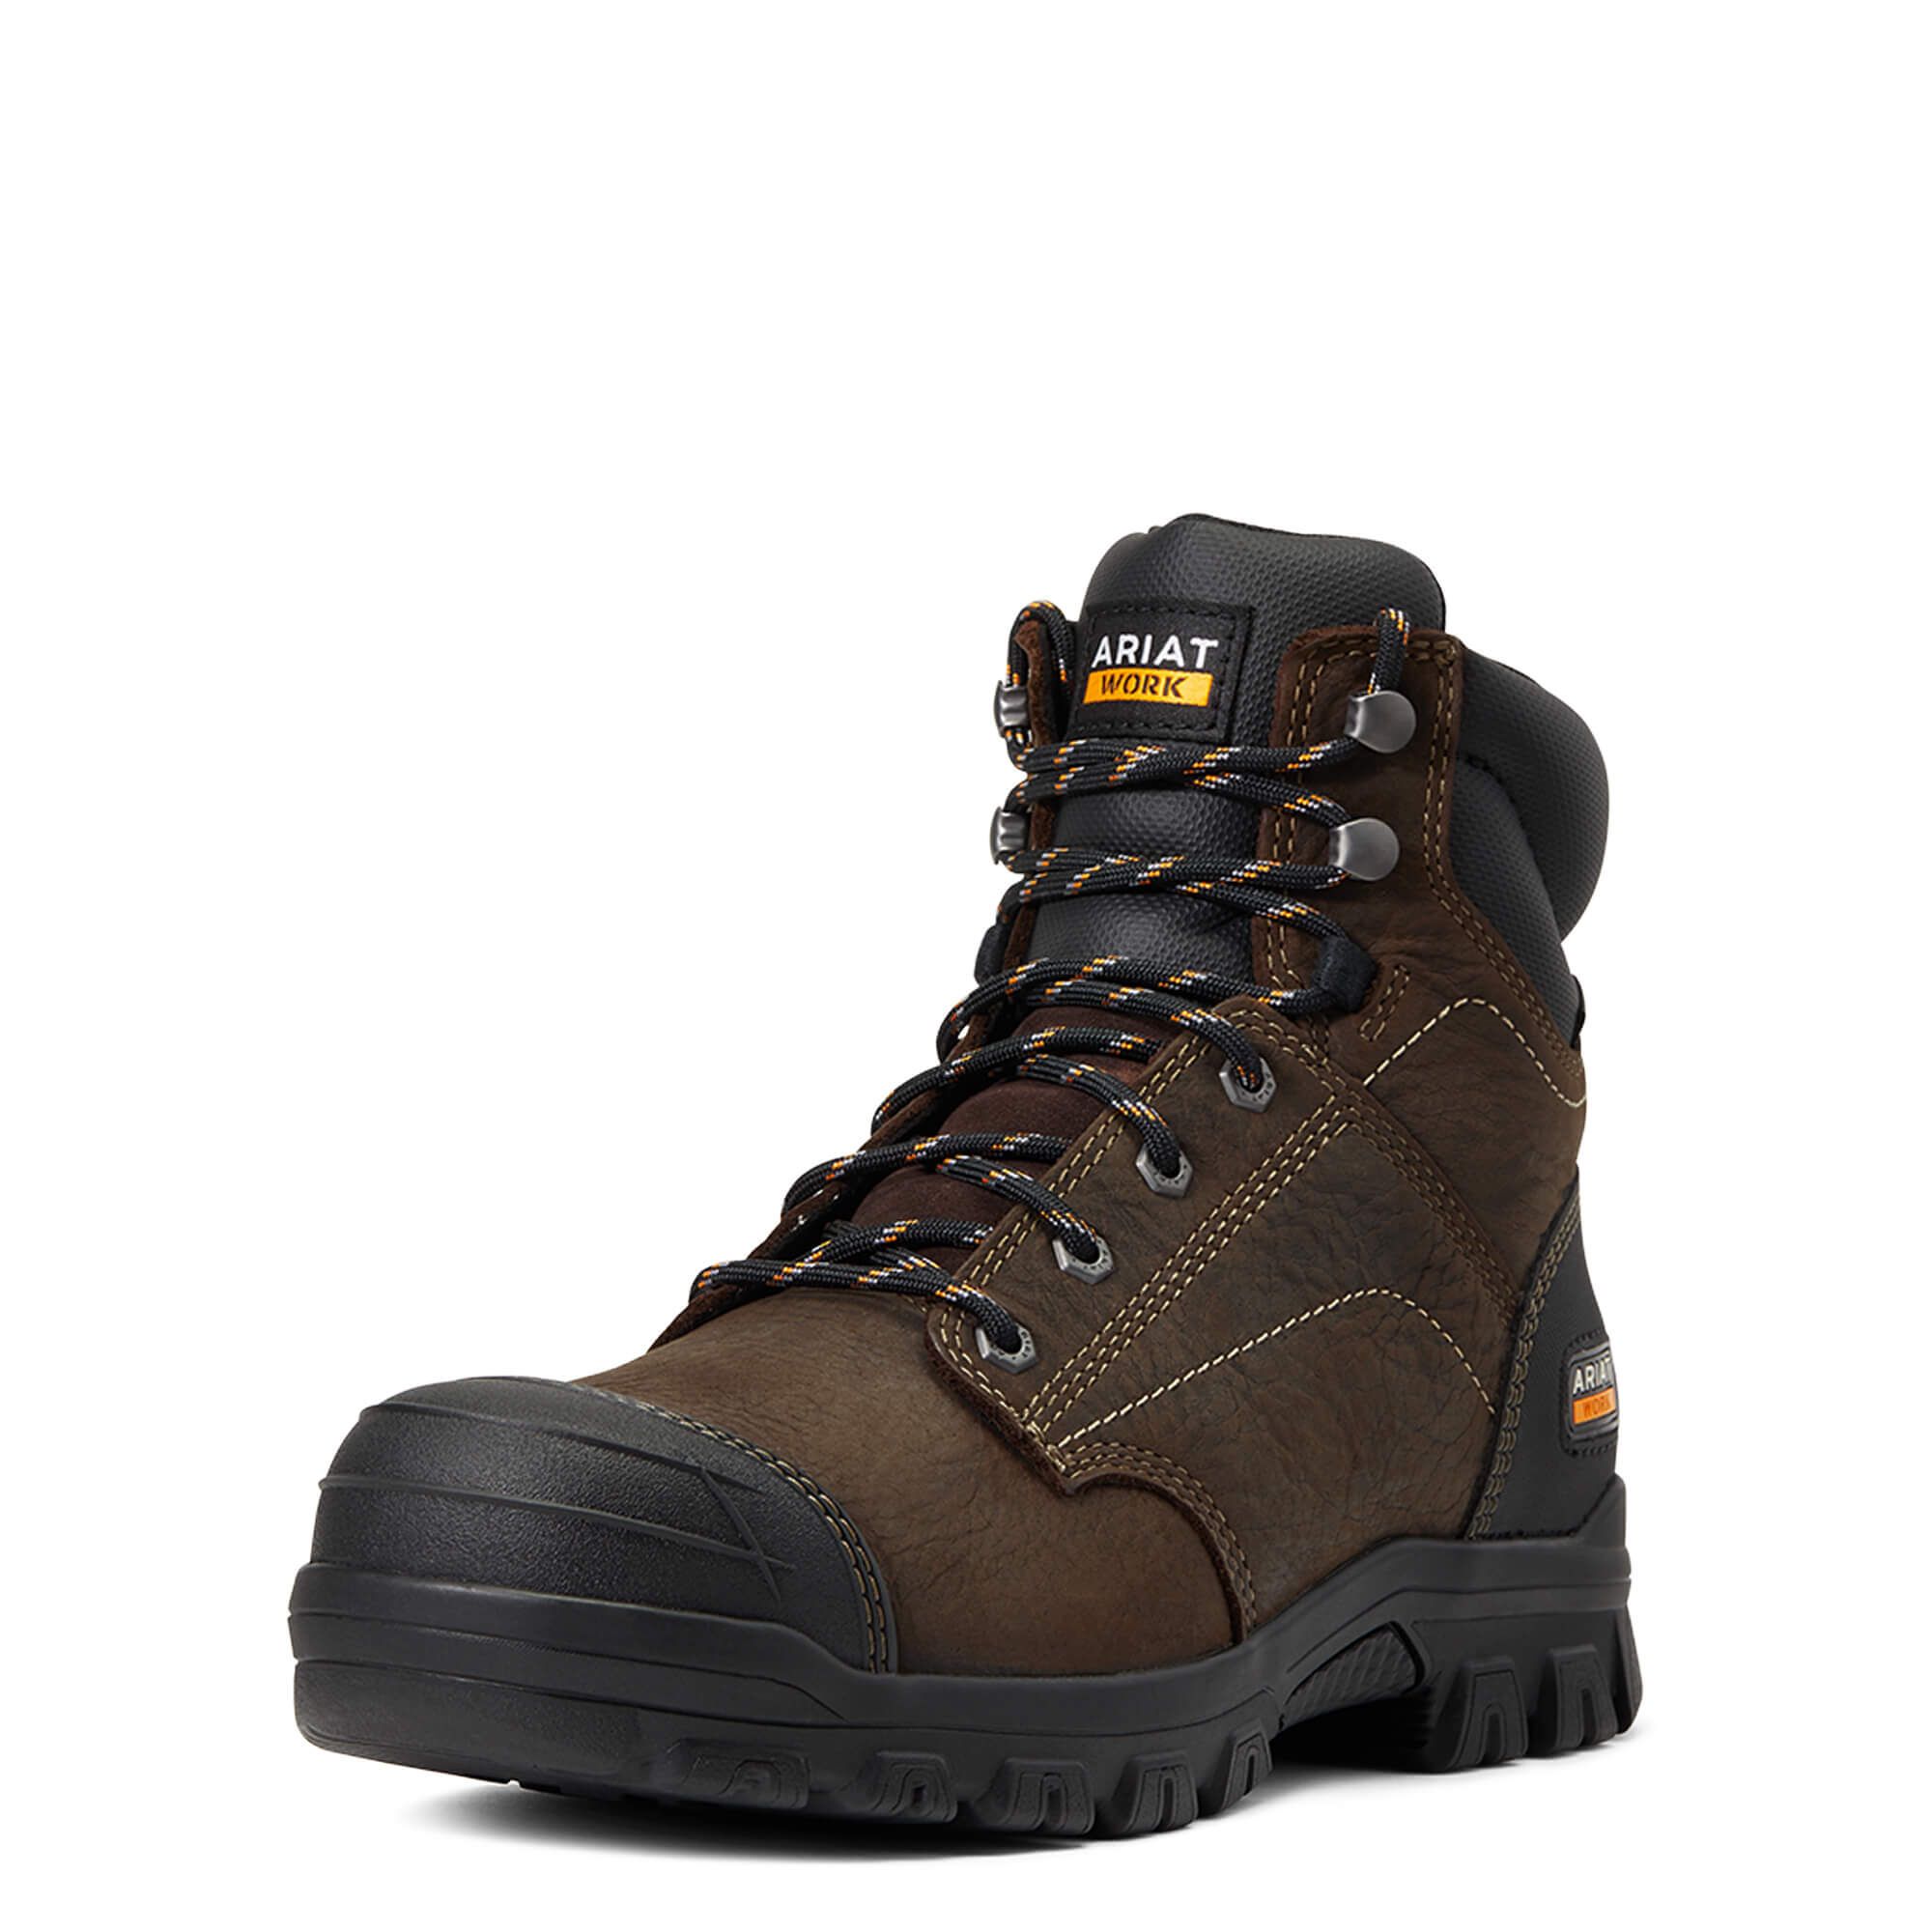 Choose womens steel toe boots on work for comfort and safety